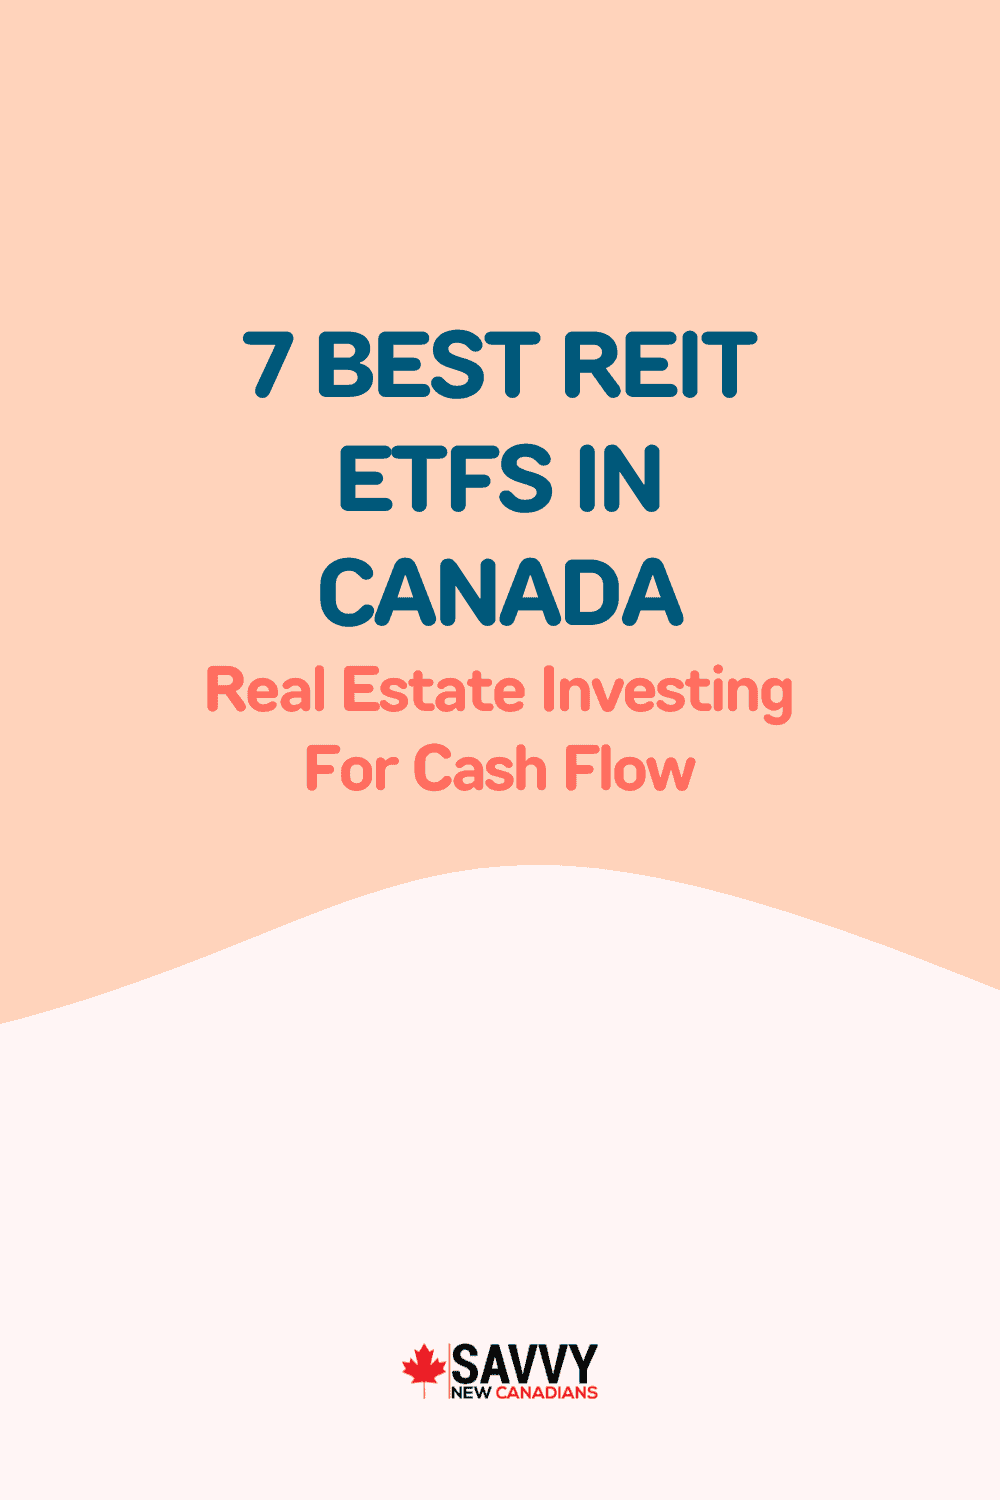 7 Best REIT ETFs in Canada for 2022: Real Estate Investing For Cash Flow